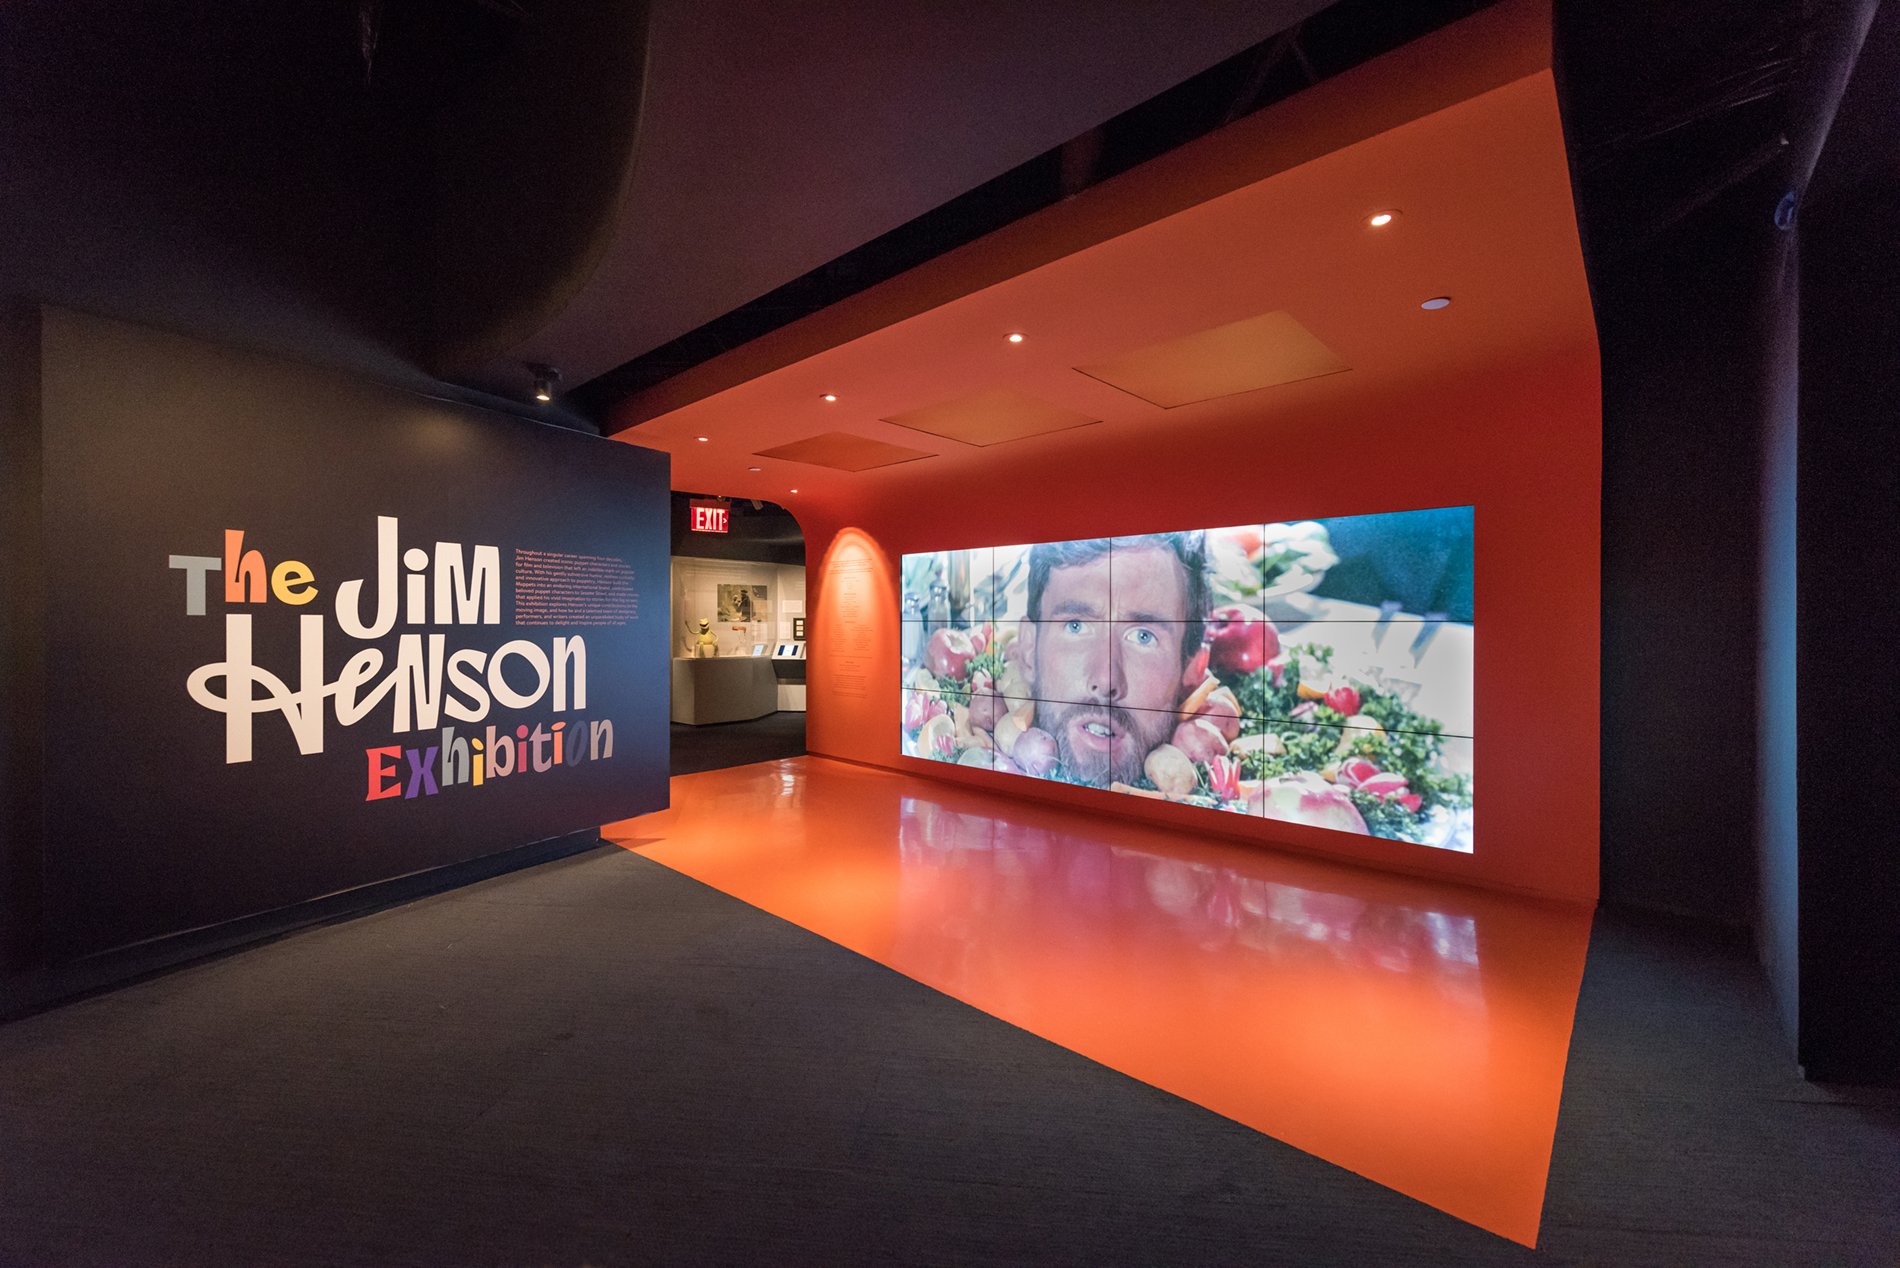 Astoria, NY, July 20, 2017 - Museum of the Moving Image. The entry to The Jim Henson Exhibition. Photo by Thanassi Karageorgiou / Museum of the Moving Image